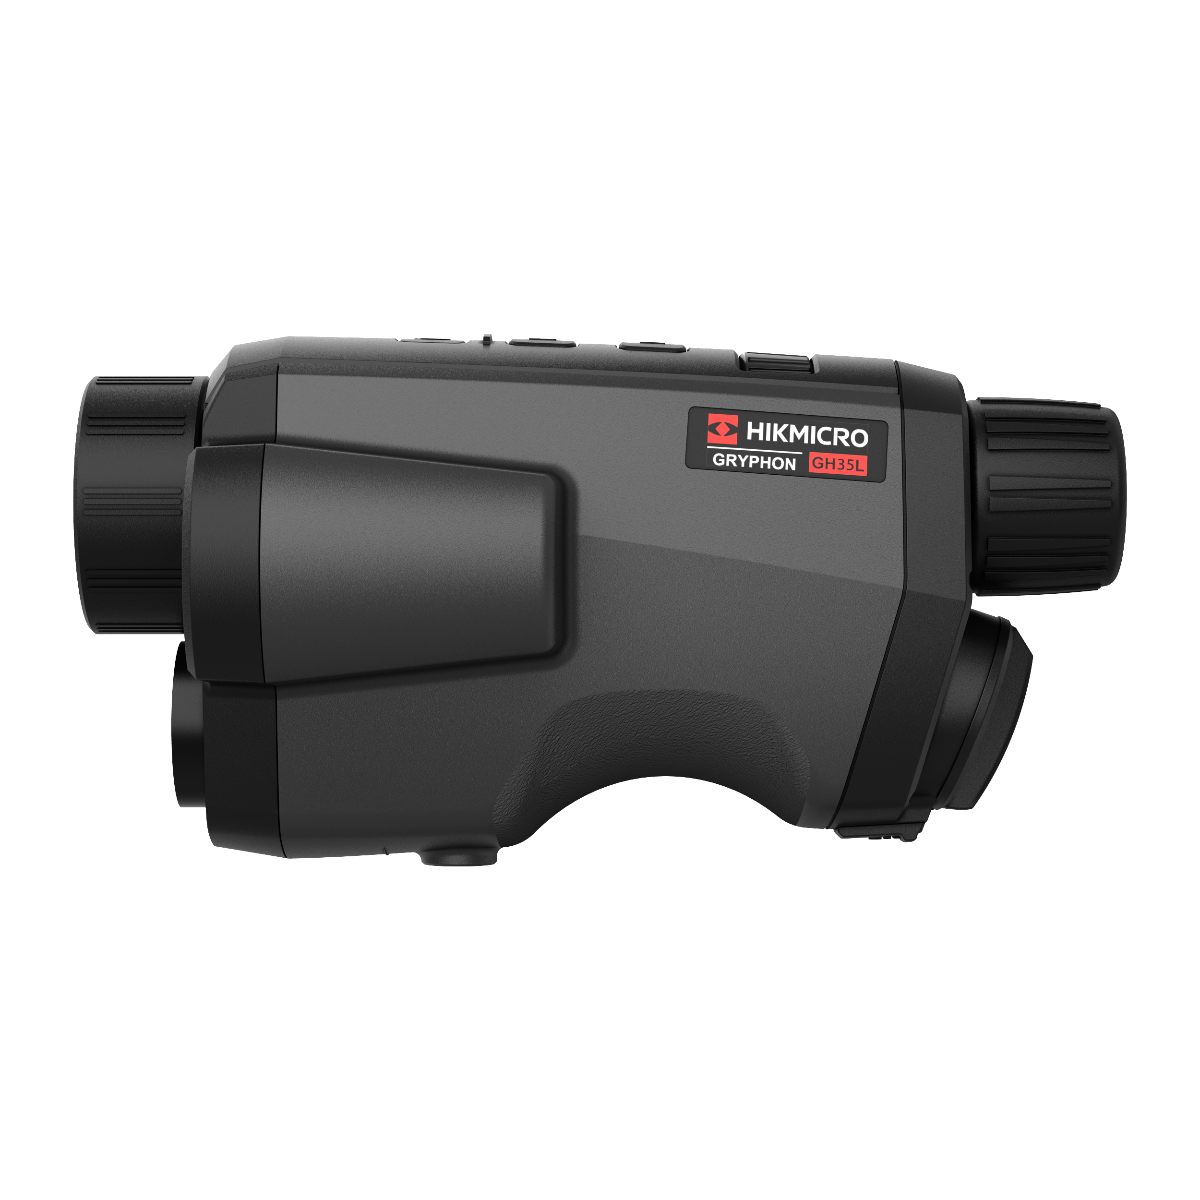 HIKMICRO Gryphon 35mm Fusion Thermal & Optical Monocular With LRF (GH35L)